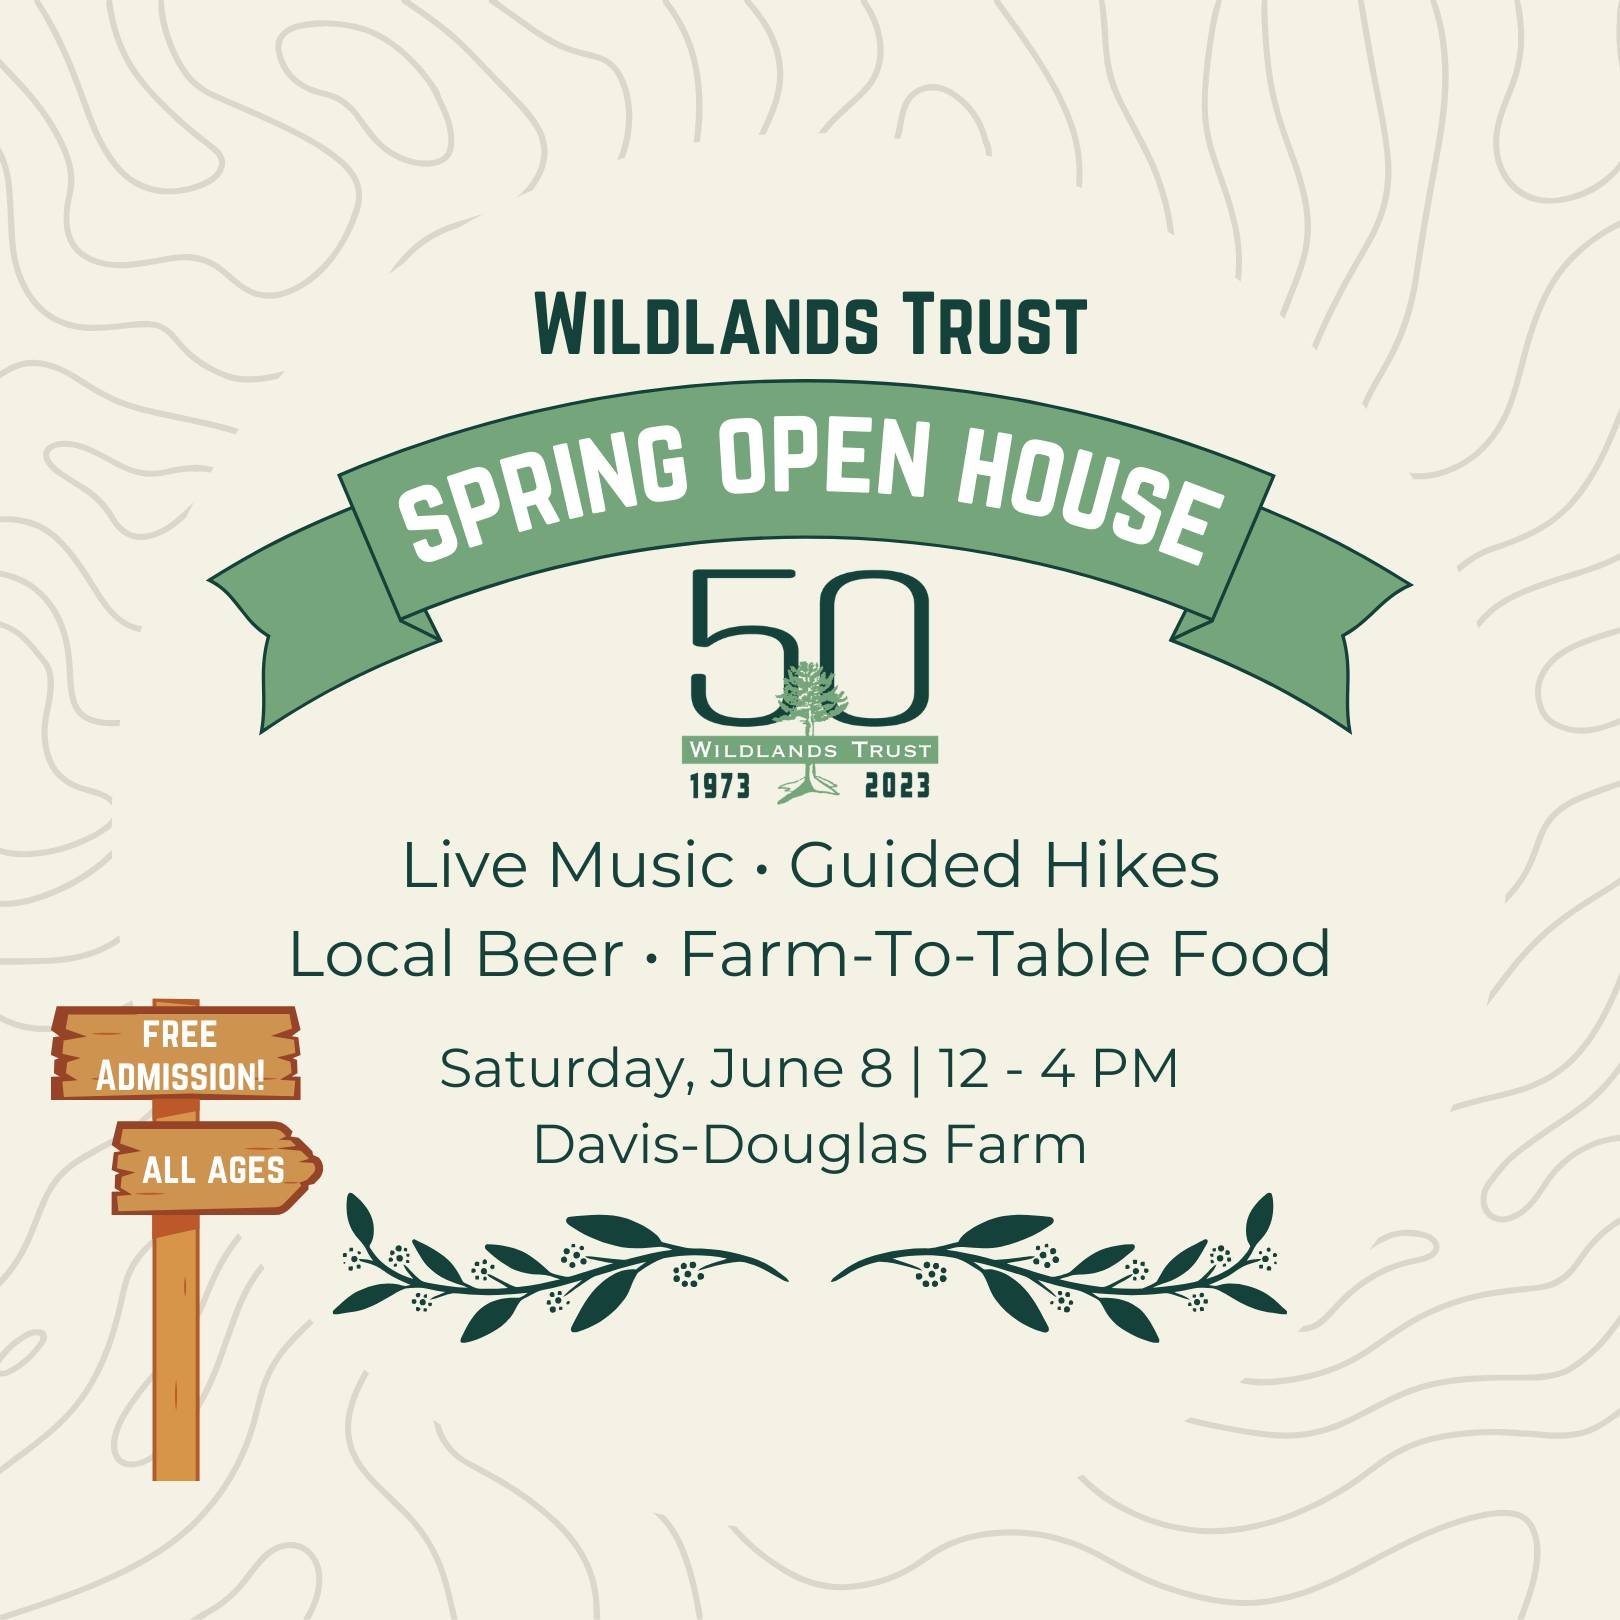 As our 50th anniversary draws to a close, let's celebrate our remarkable year together 💚

Join the Wildlands community on Saturday, June 8, for a Spring Open House at Davis-Douglas Farm in Plymouth! This 𝐟𝐫𝐞𝐞, 𝐩𝐮𝐛𝐥𝐢𝐜 𝐞𝐯𝐞𝐧𝐭 promises fu